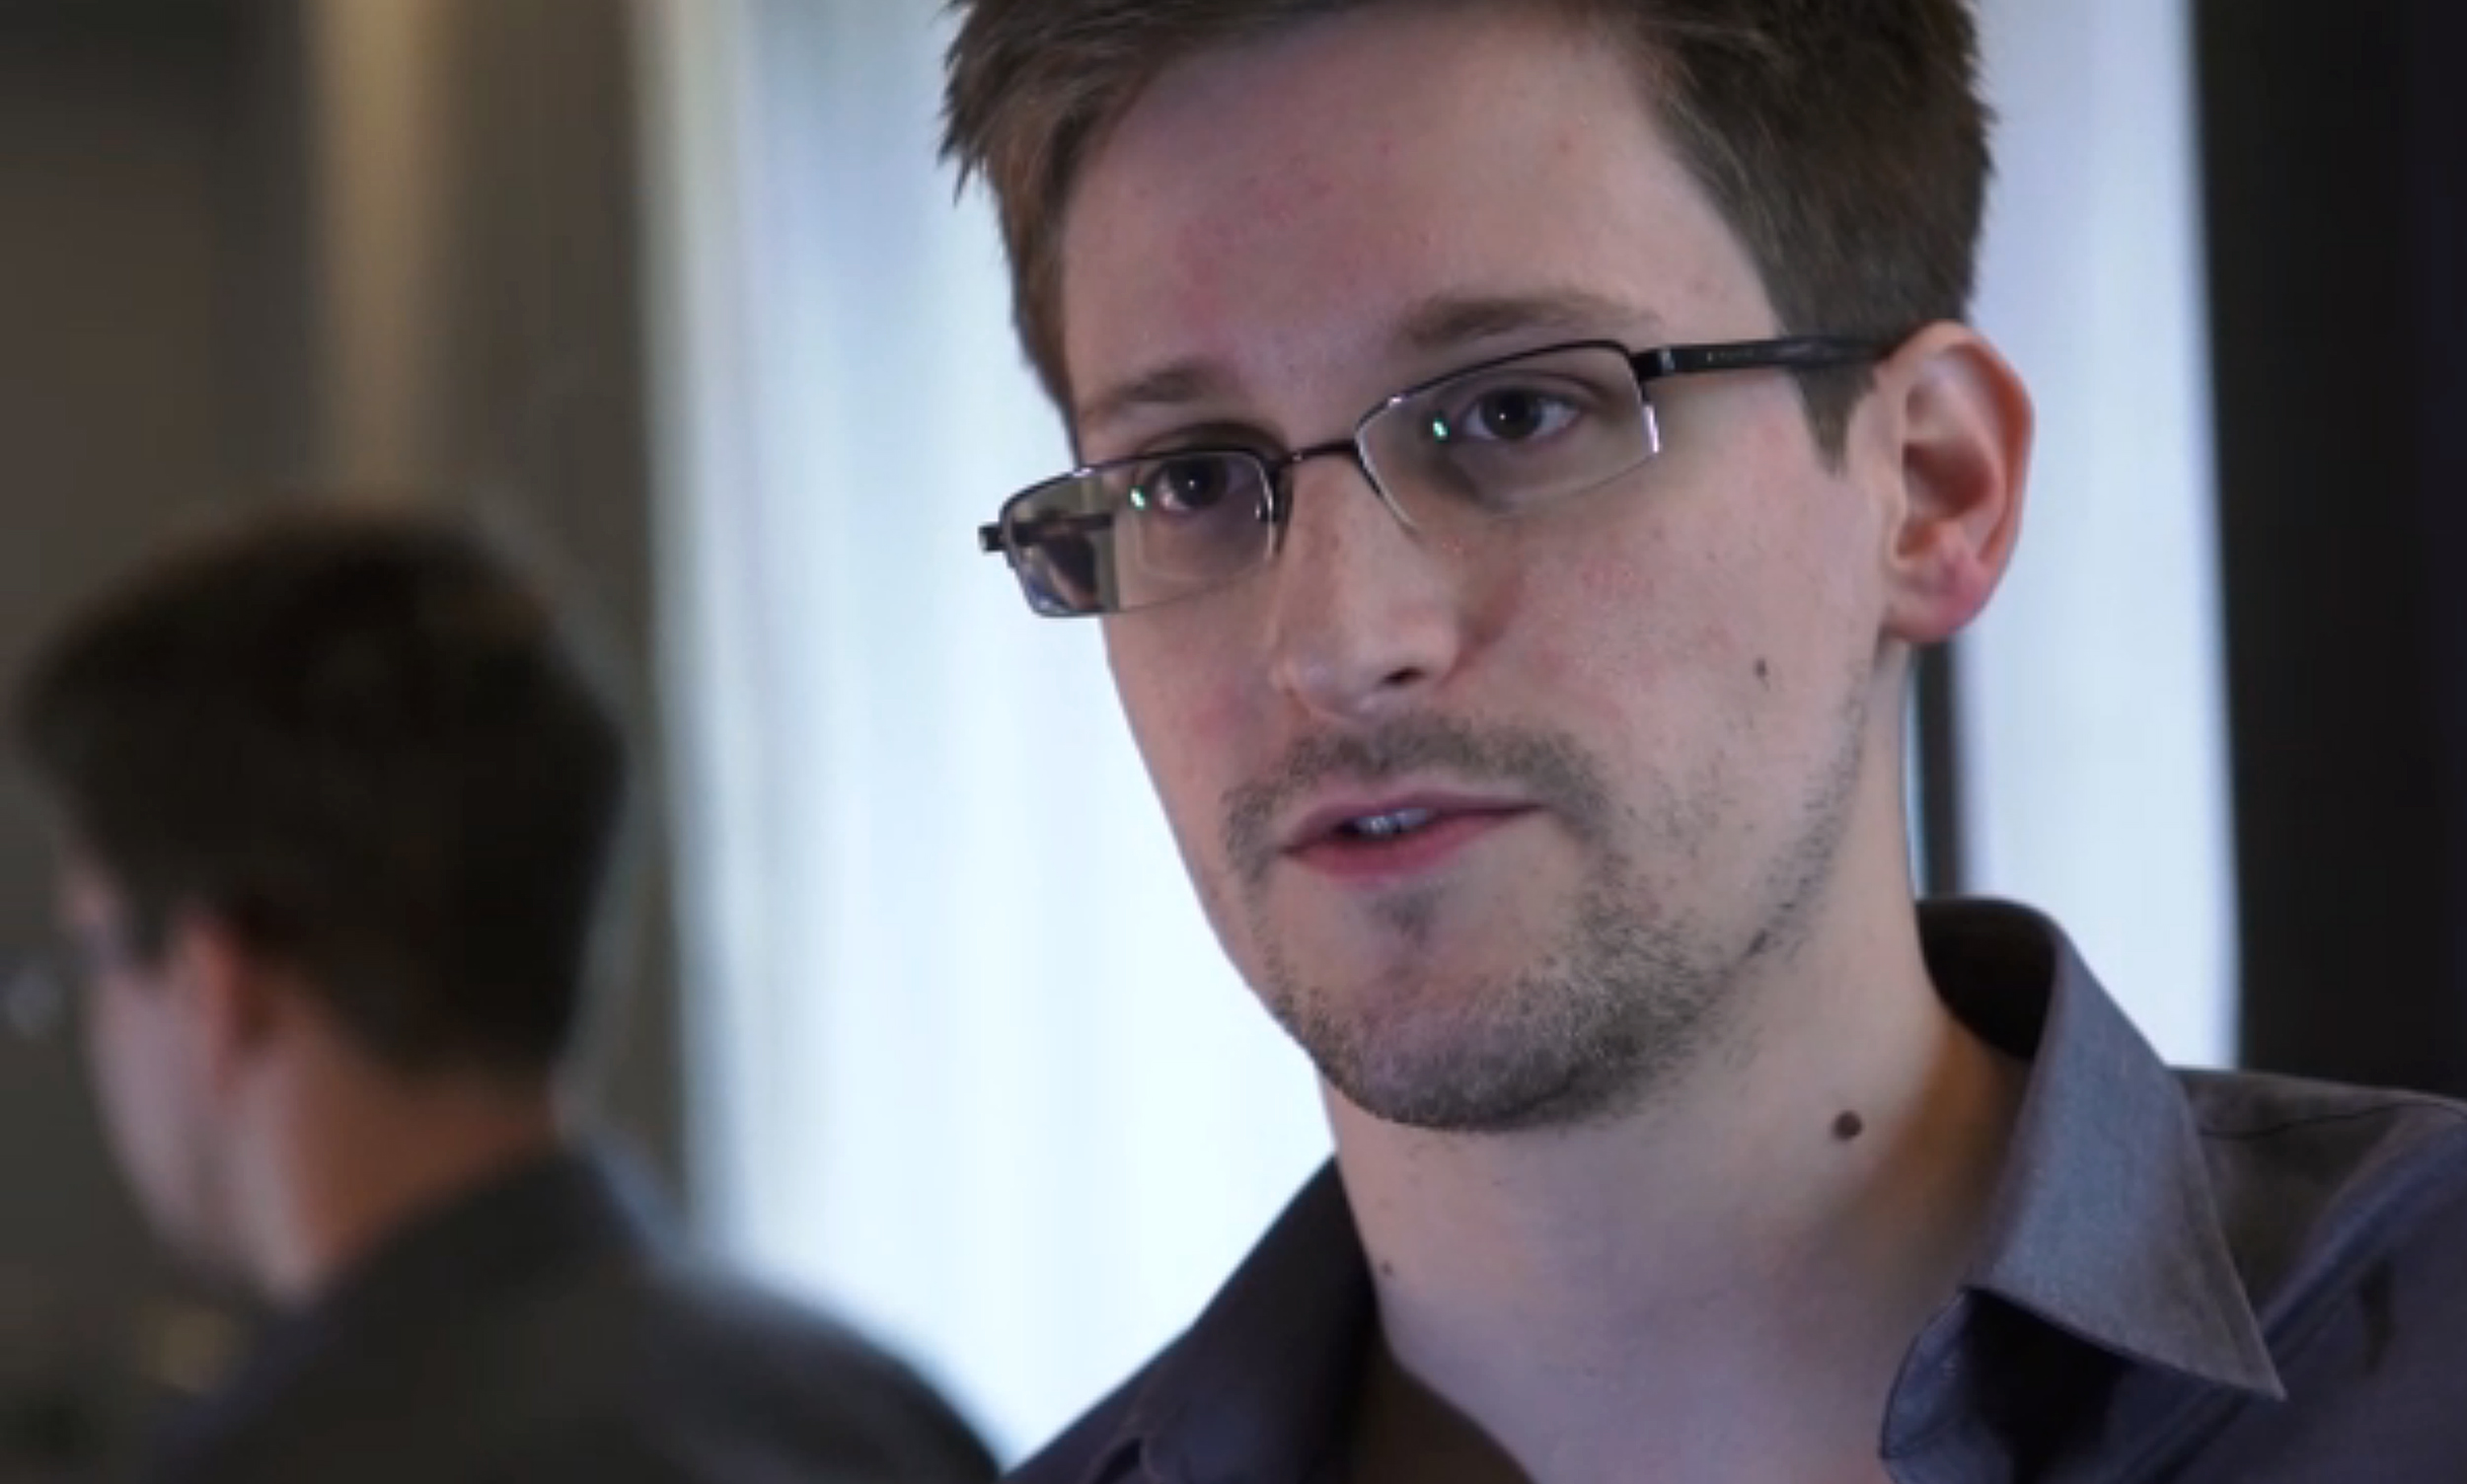 Edward Snowden speaks during an interview with The Guardian newspaper at an undisclosed location in Hong Kong. Photo: AFP